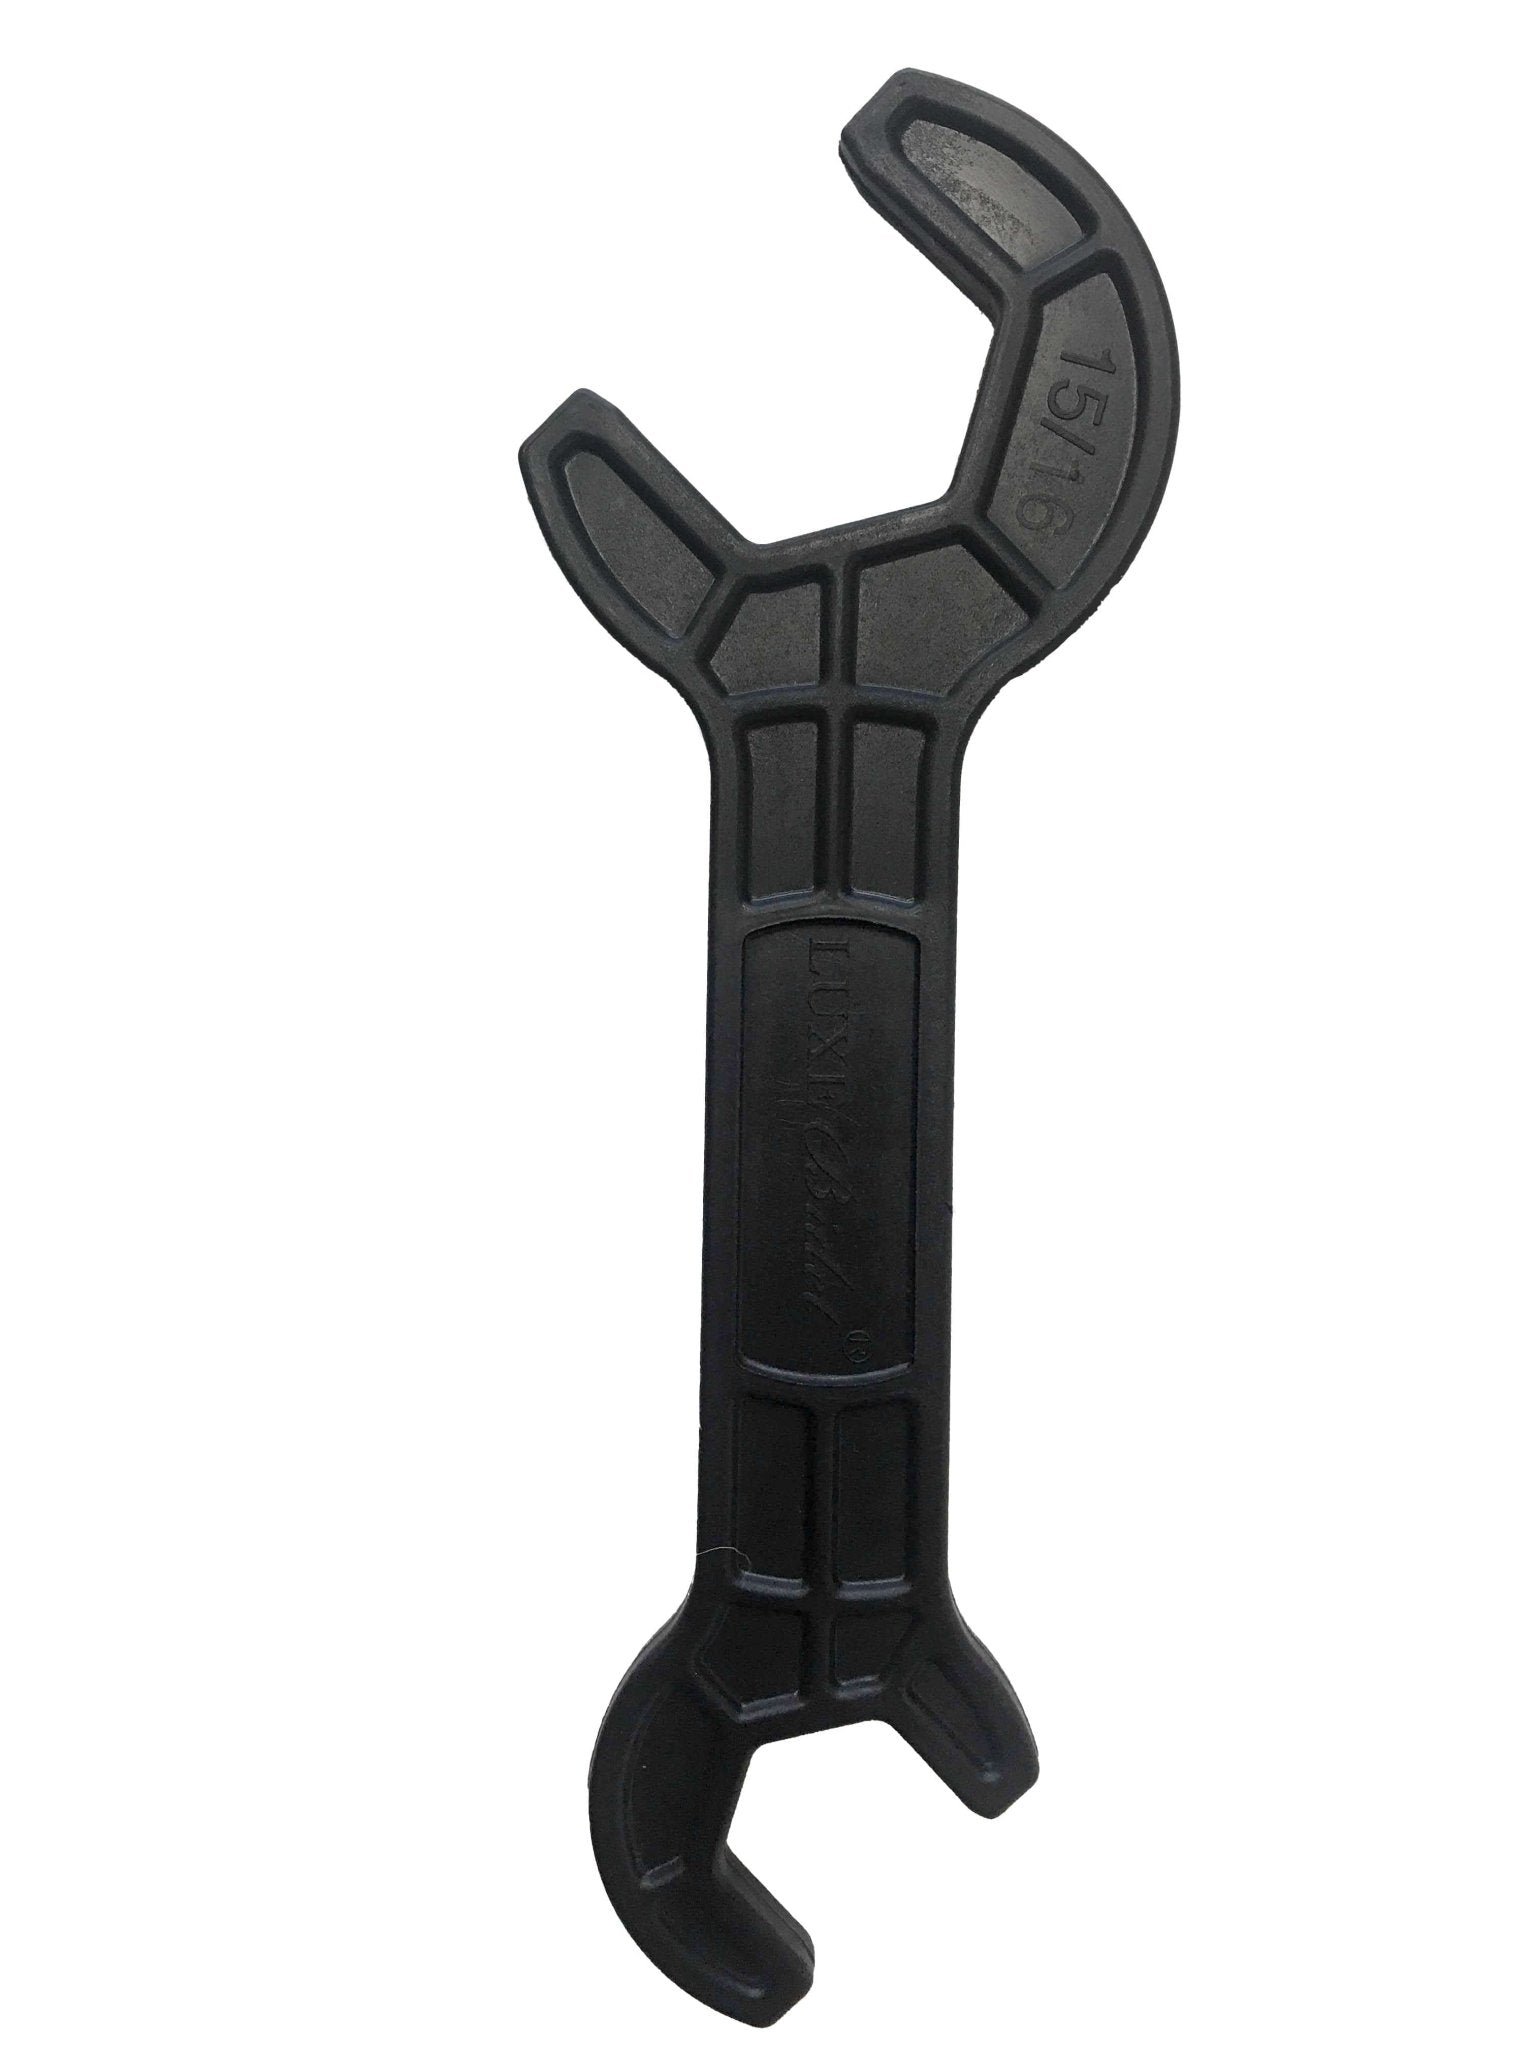 Plastic Wrench - 7/8 inch by 3/8 inch